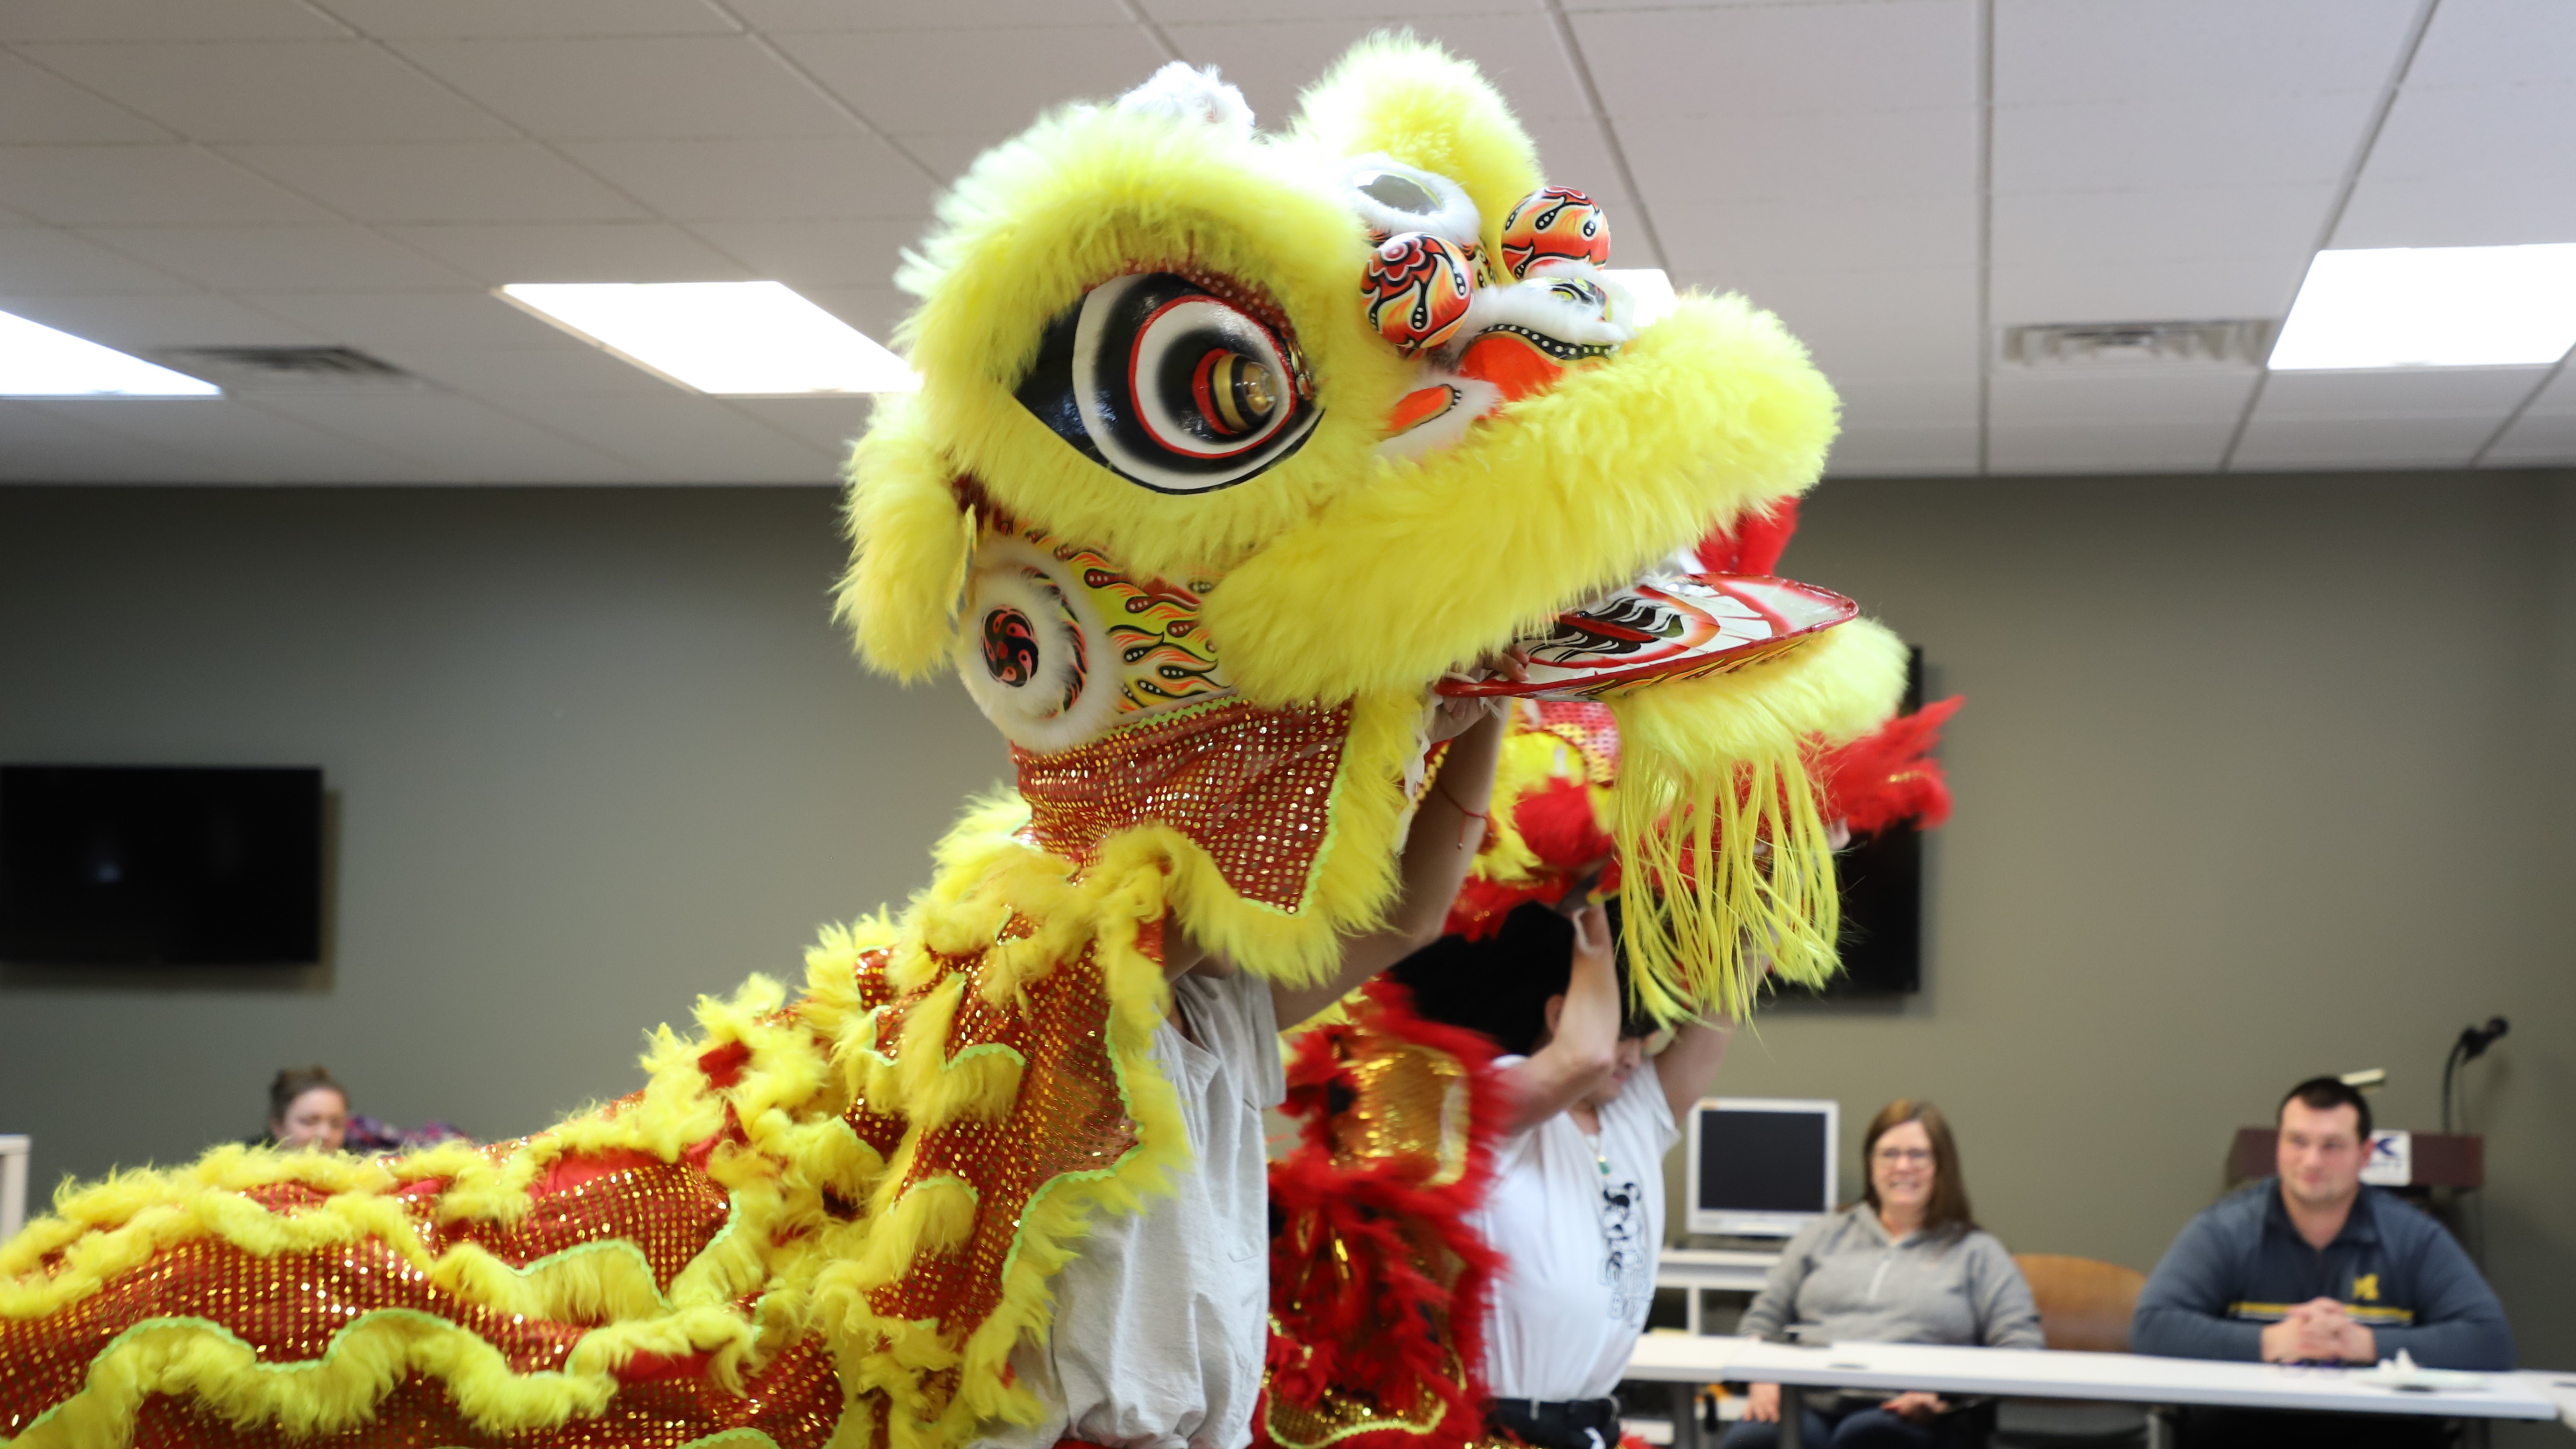 Lotus Boyz GR lion dance group performs at DK Security in Grand Rapids